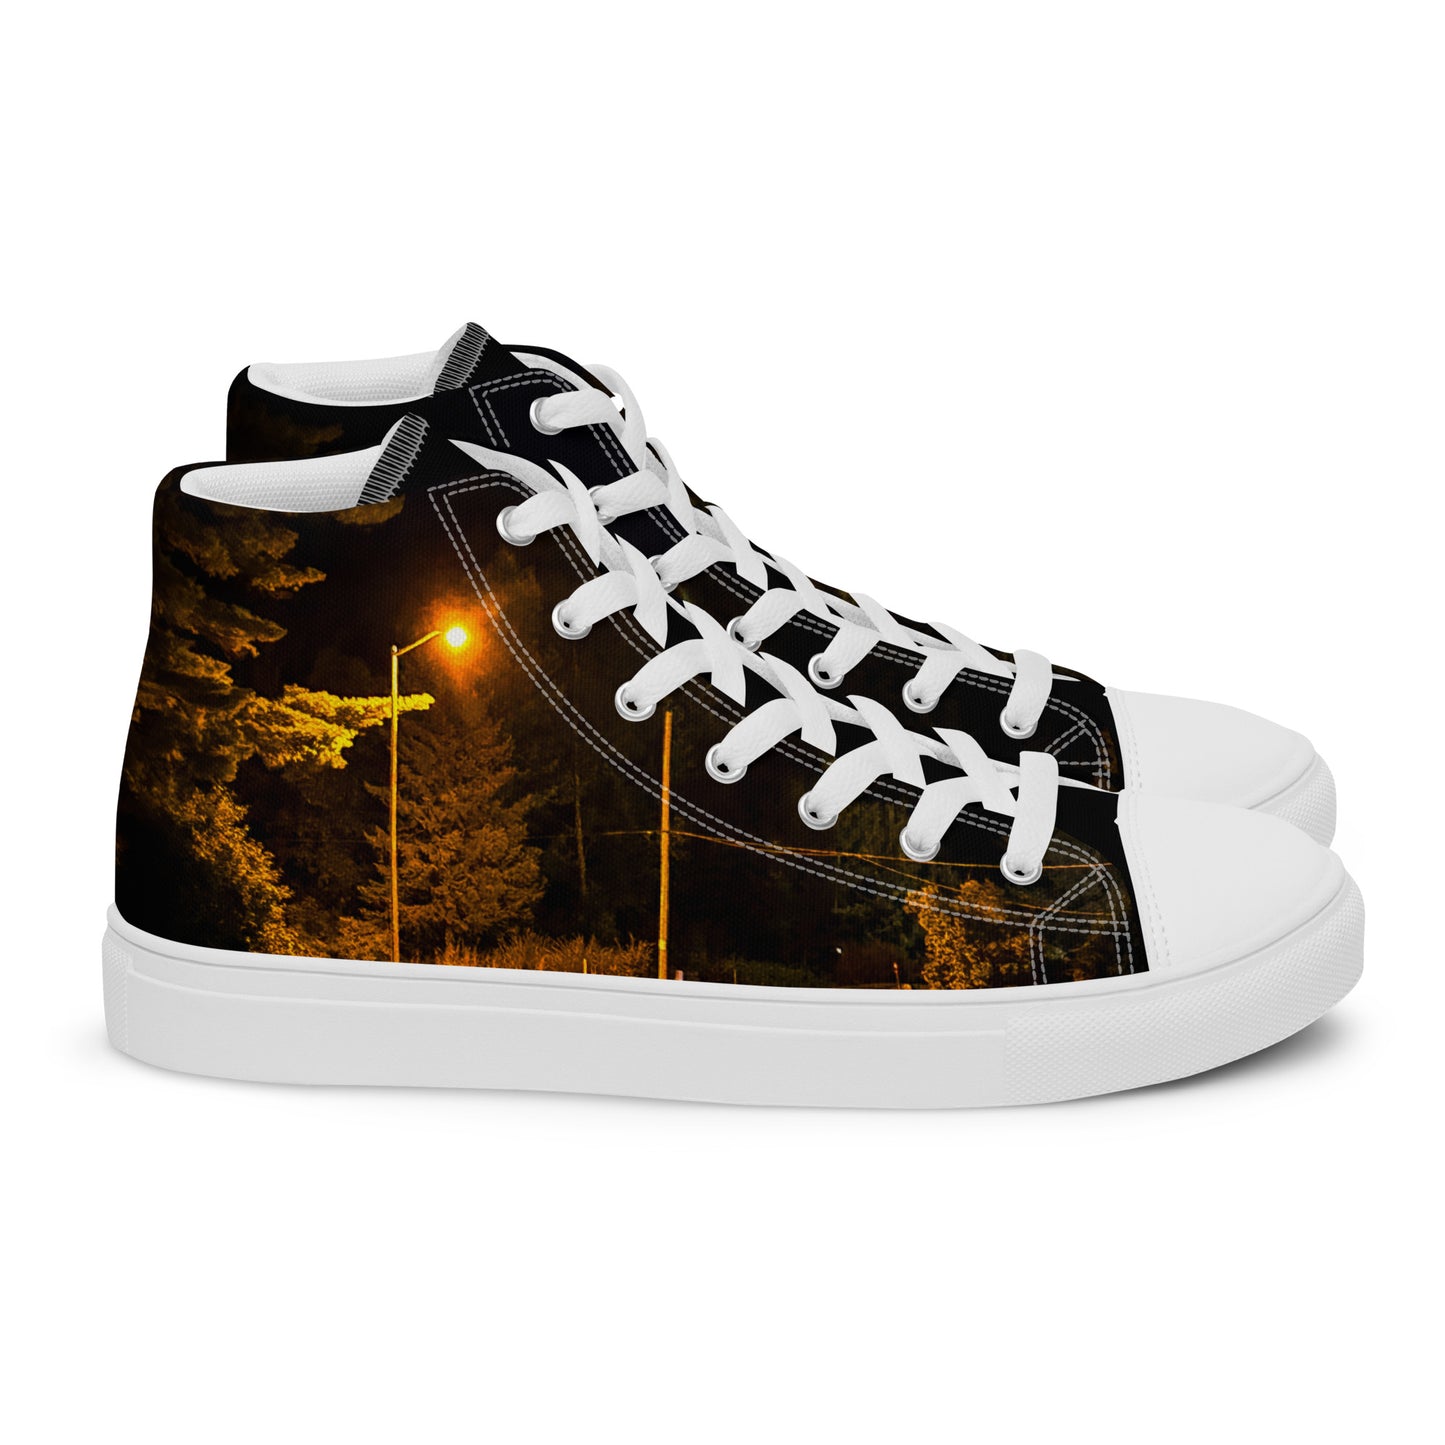 Lonely Light Women’s high top shoes